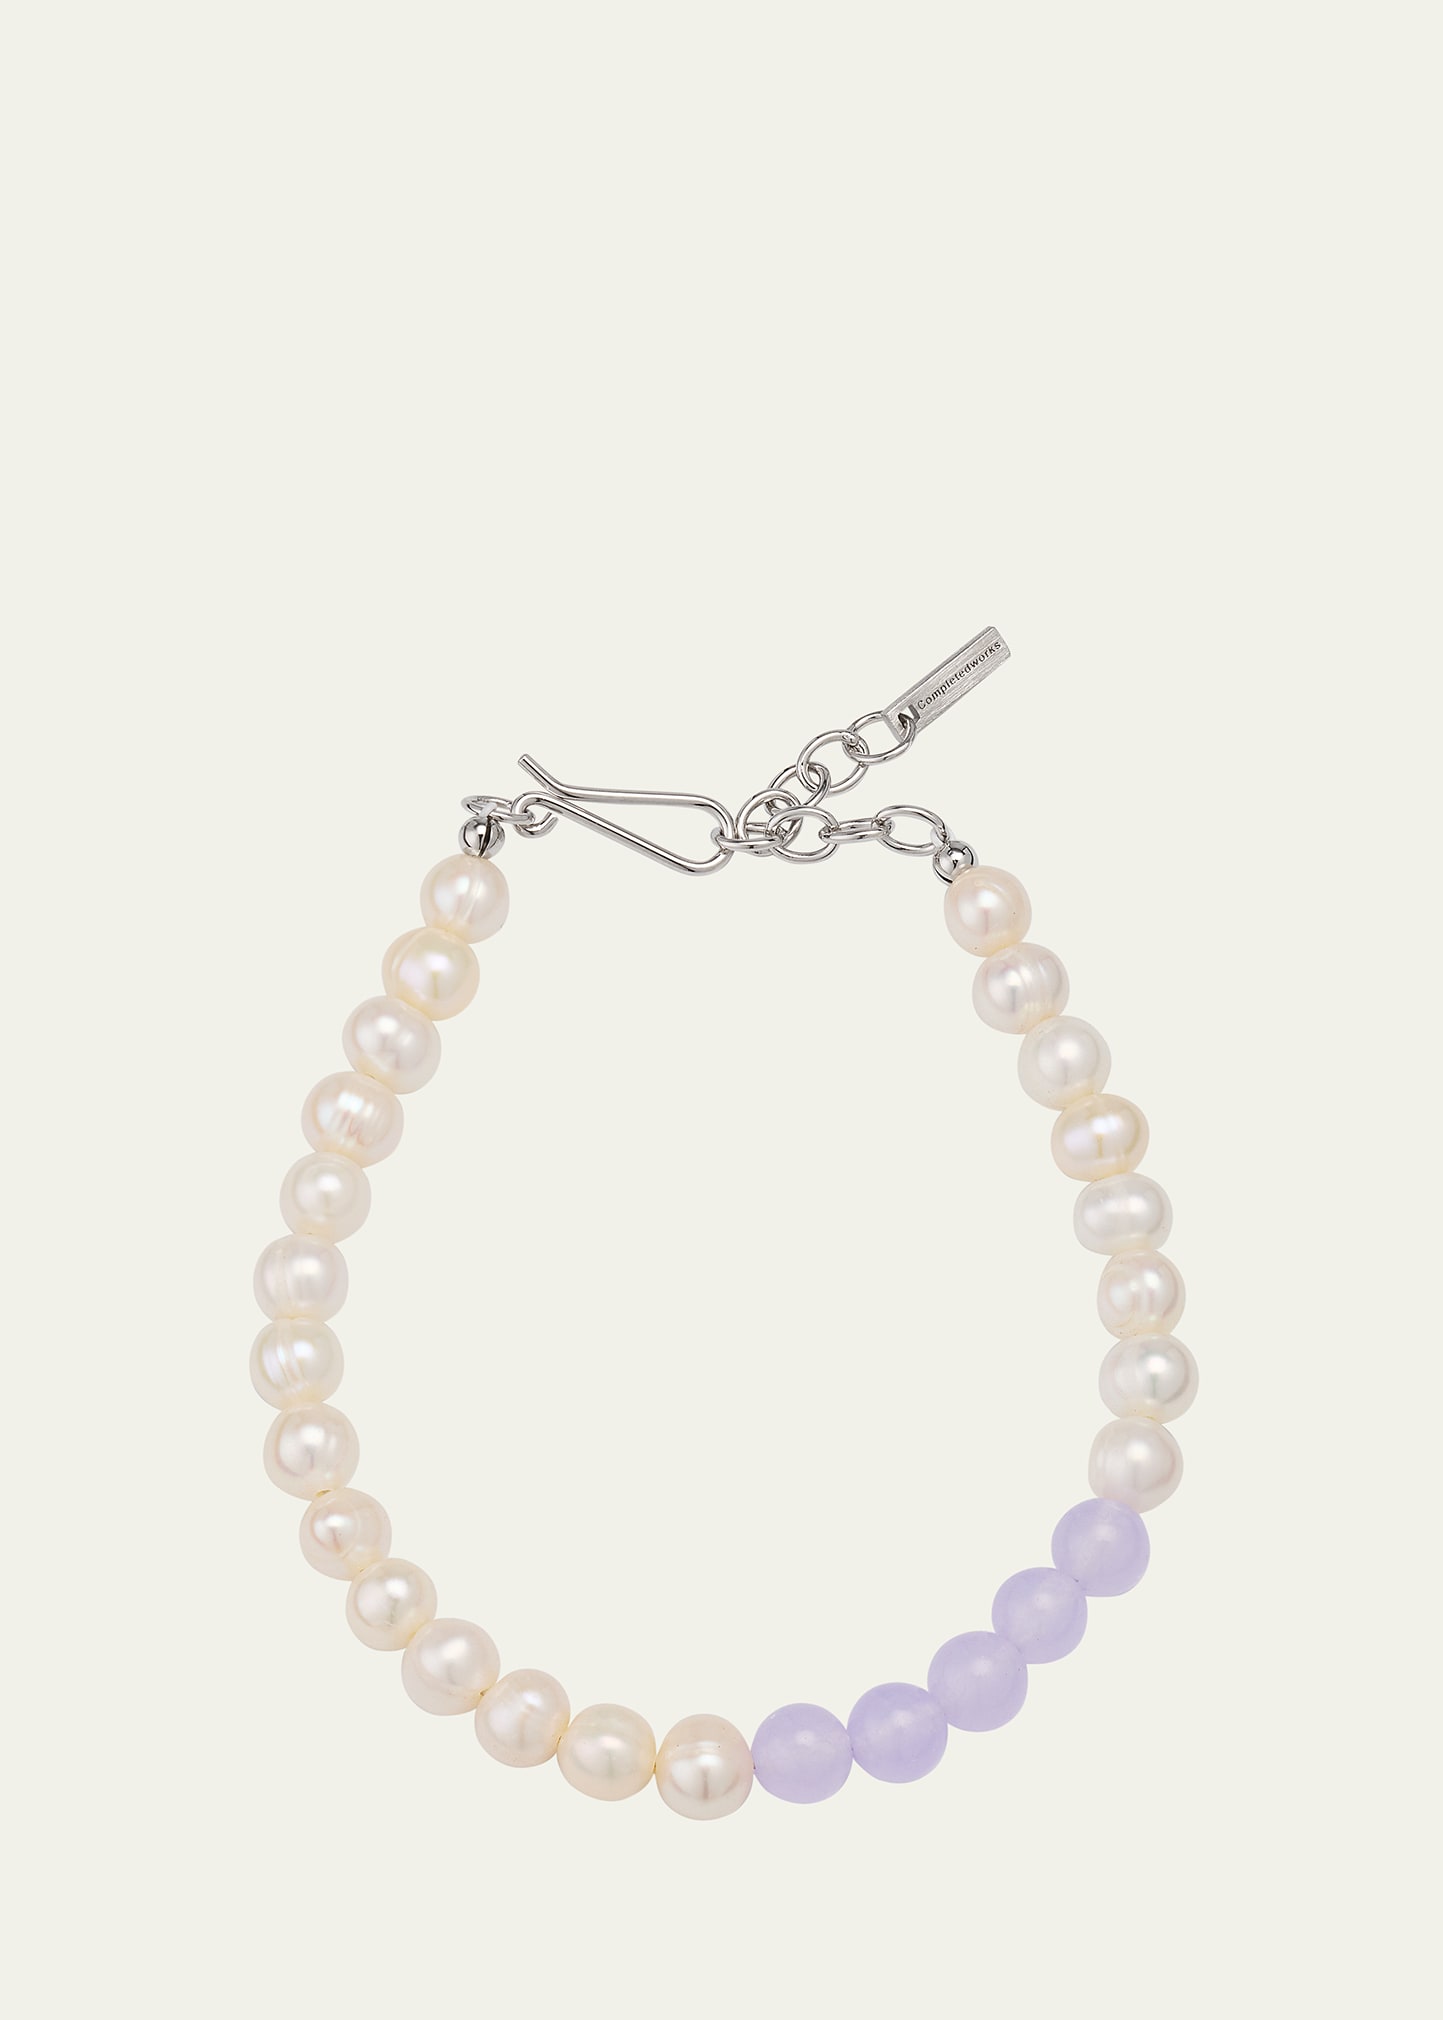 Lilac Jade Silver Bracelet with Freshwater Pearls